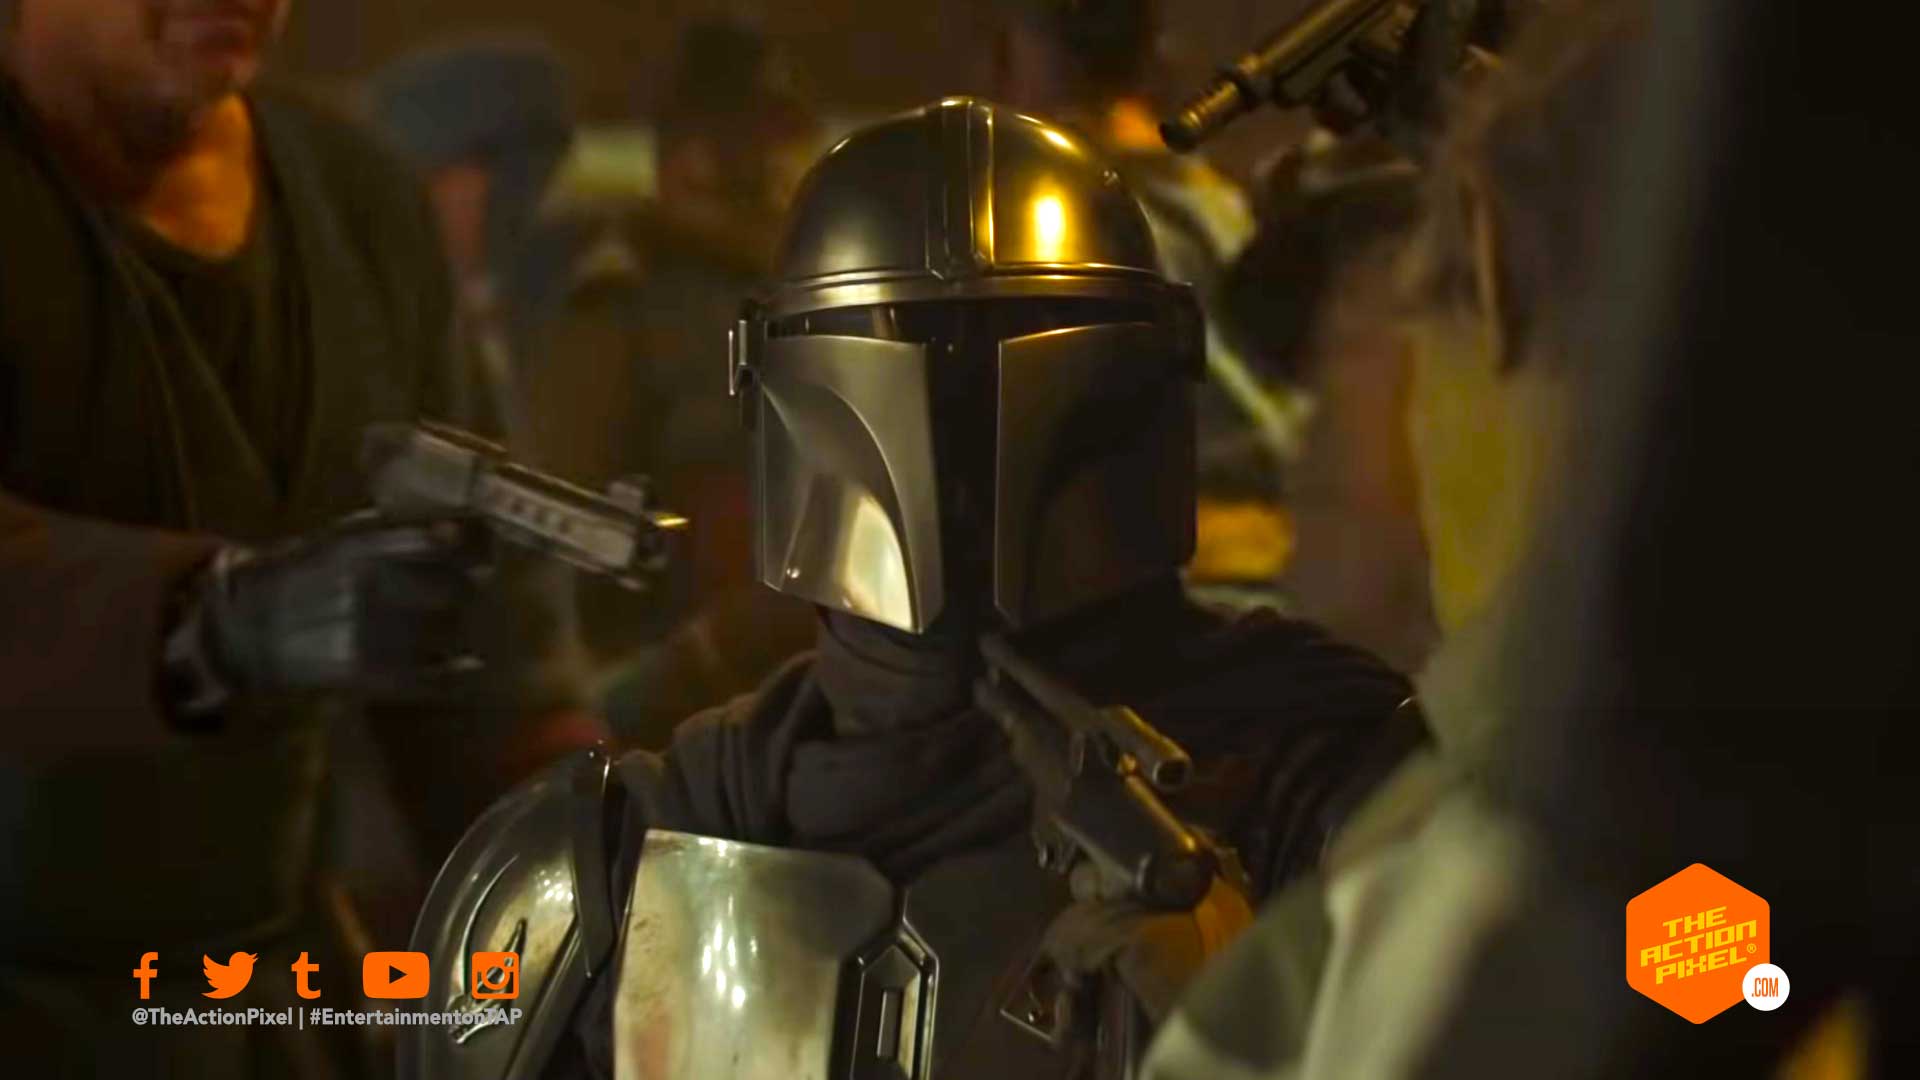 the mandalorian, the mandalorian trailer, the mandalorian season 2 trailer, the mandalorian season 2, the mandalorian season 2 special look, disney+ , disney plus, disneyplus,disney plus movies, disney plus series, star wars the mandalorian season 2, star wars the mandalorian, the child the mandalorian, the child, baby yoda, entertainment on tap, the action pixel, featured,